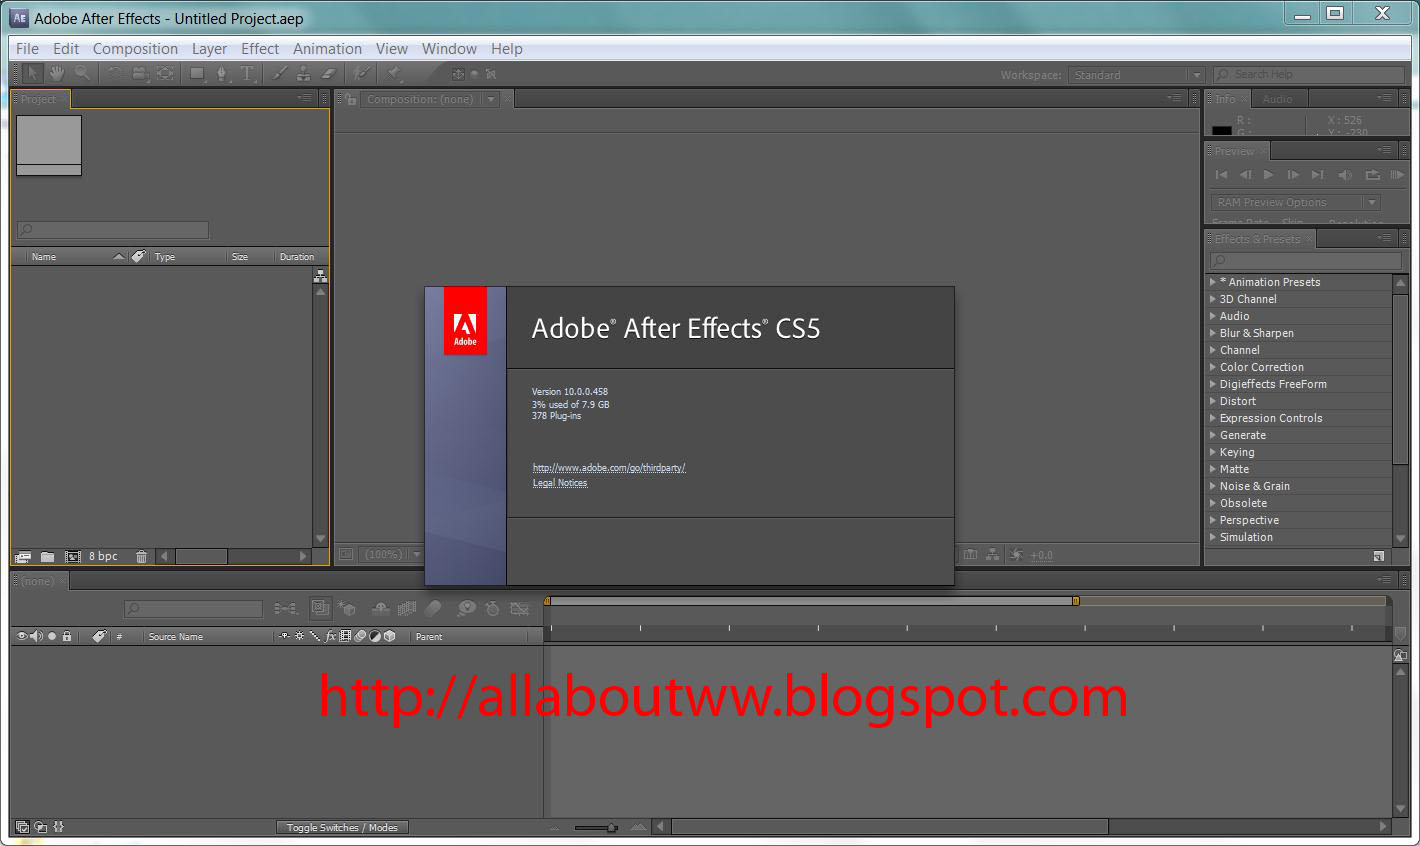 After effects keyframe. Adobe after Effects CS5.5. Adobe after Effects crack. Пароль Adobe after Effects. Adobe after Effects лицензия.